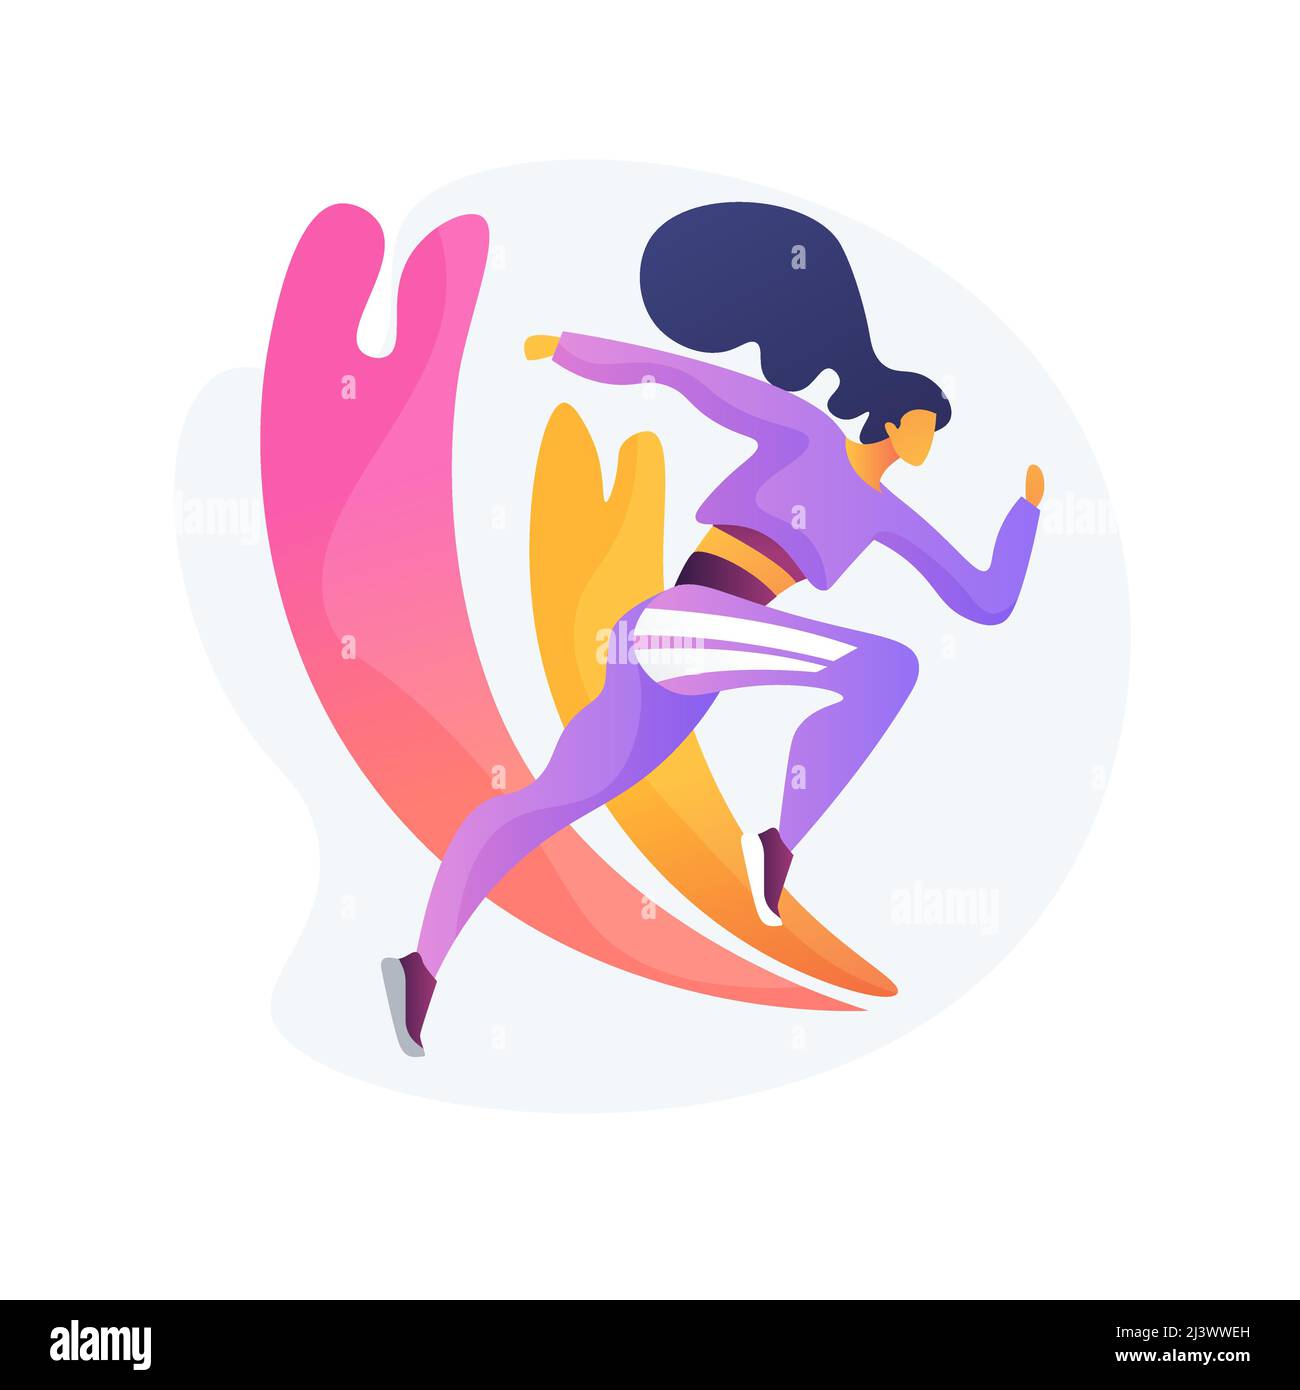 Workout clothes fashion. Trendy sportswear, sports uniform, fitness look. Female athlete, sportswoman exercising in fashionable gym apparel. Vector is Stock Vector